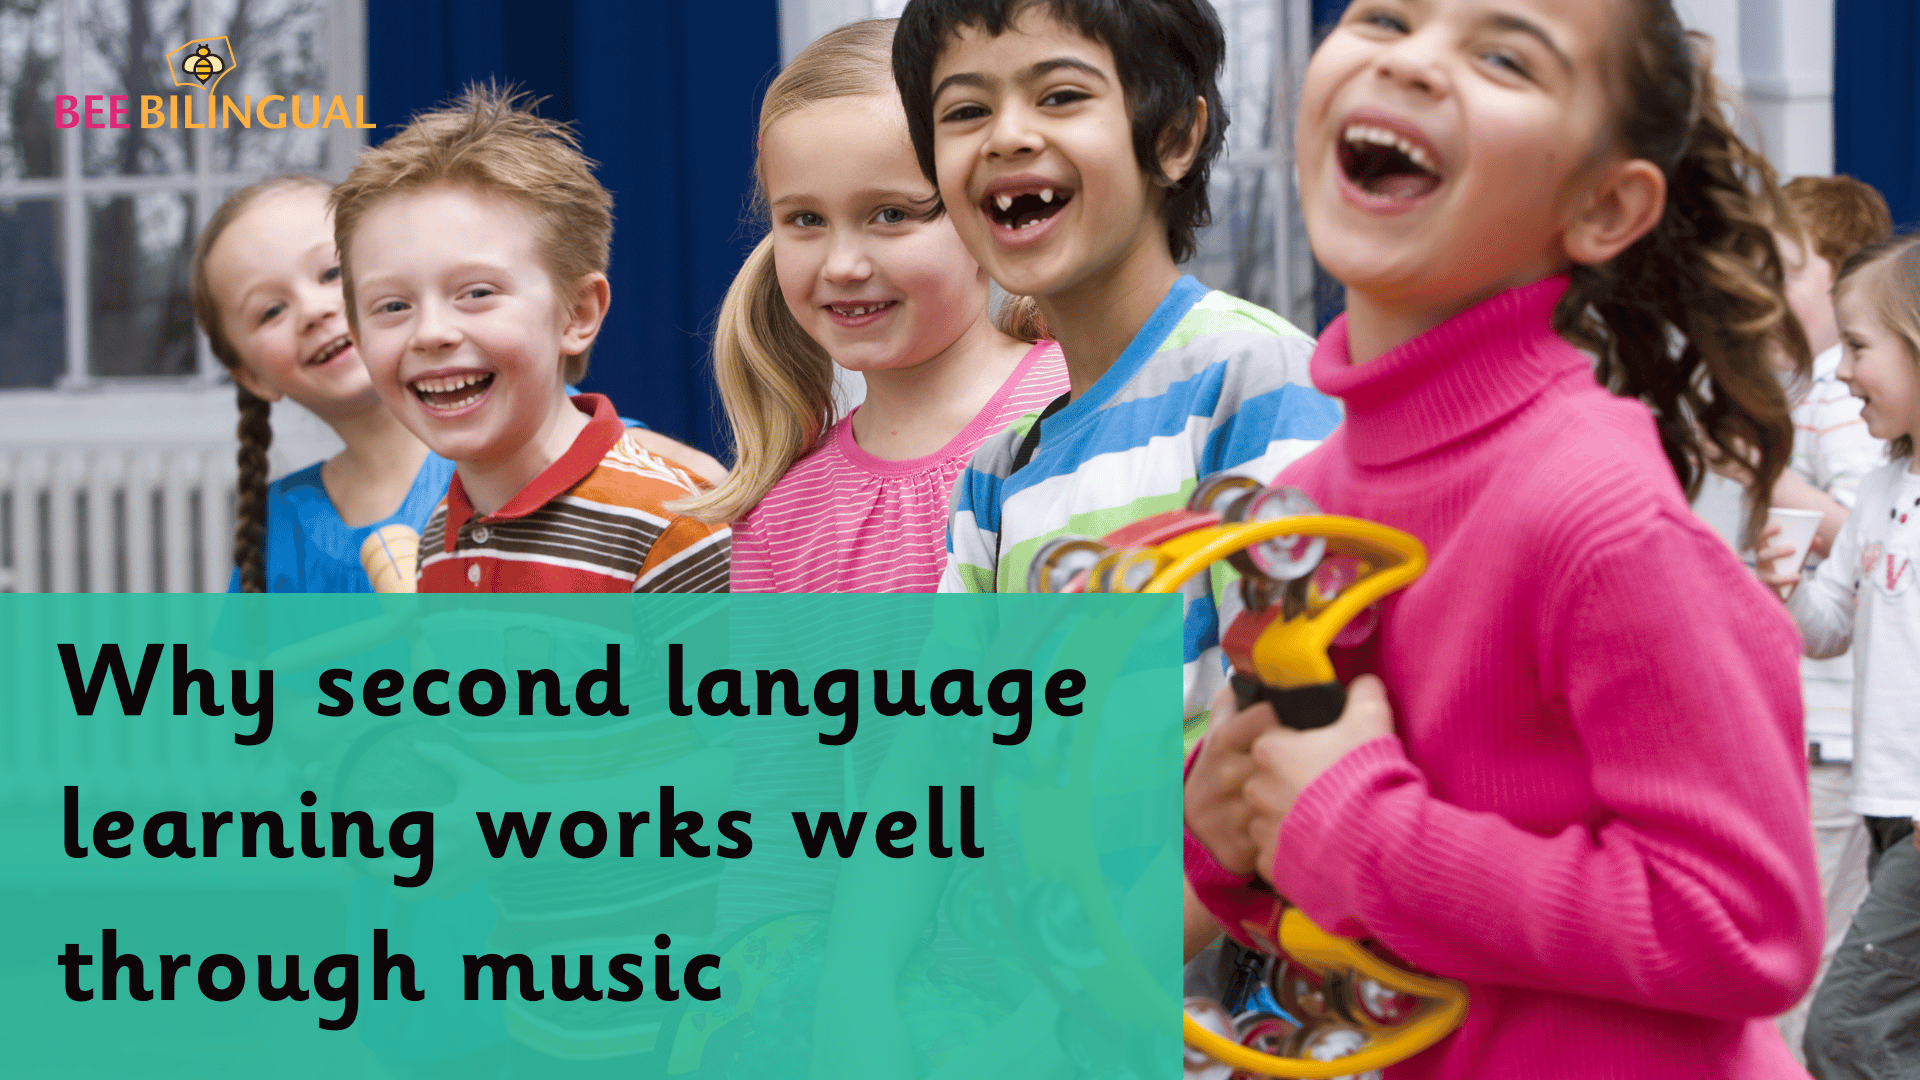 music and language learning